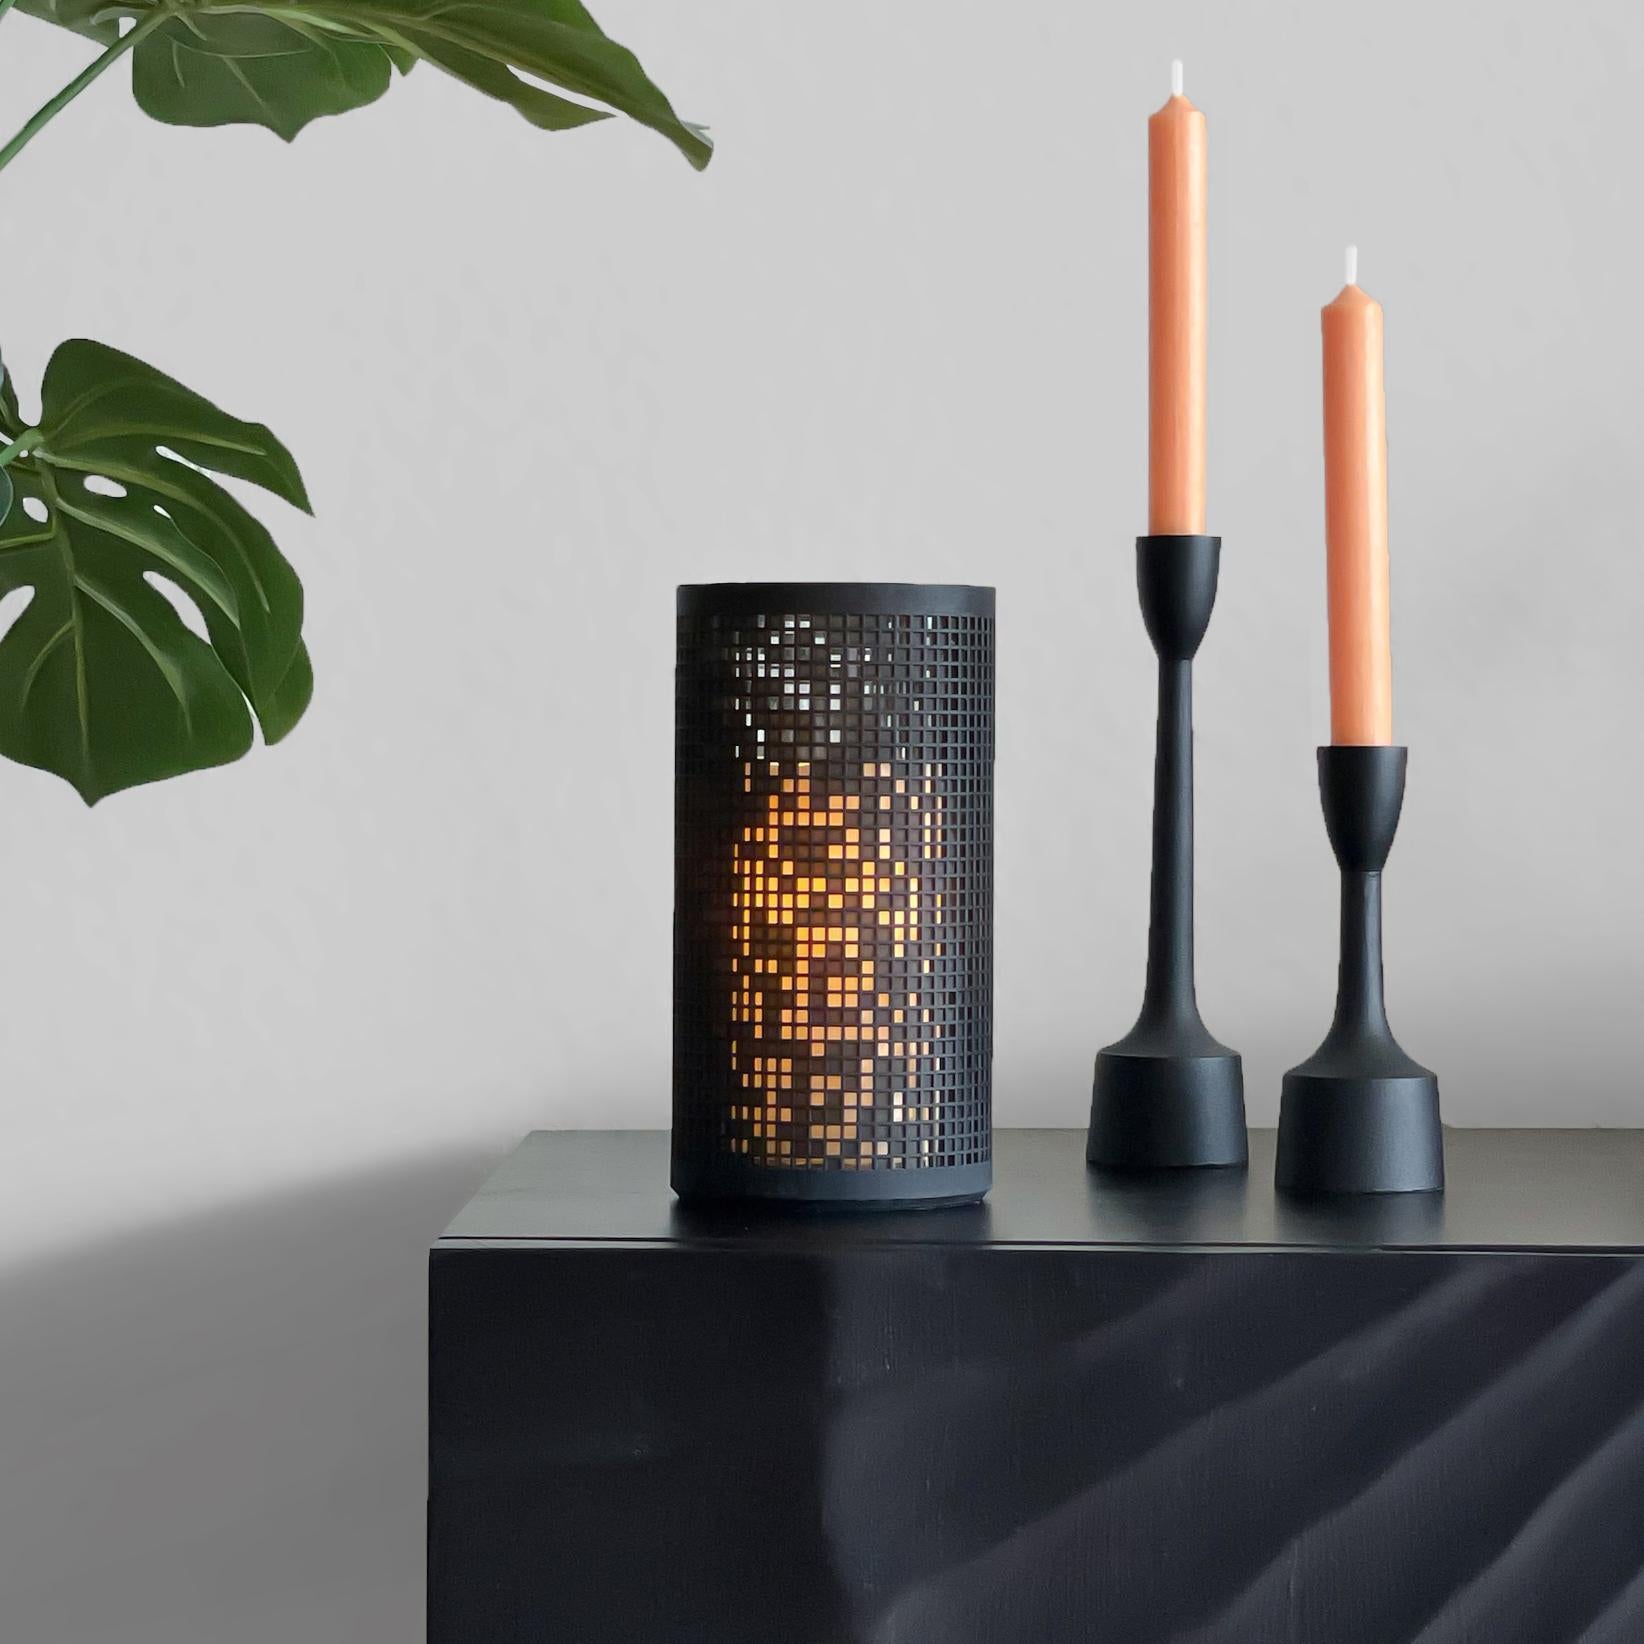 SPACE is part of a narrative vase collection whose design was inspired by the five elements of EARTH, WATER, FIRE, AIR and SPACE.
Apart from its cylindrical basic shape, each vase is characterized by an individual pattern that is defined by the